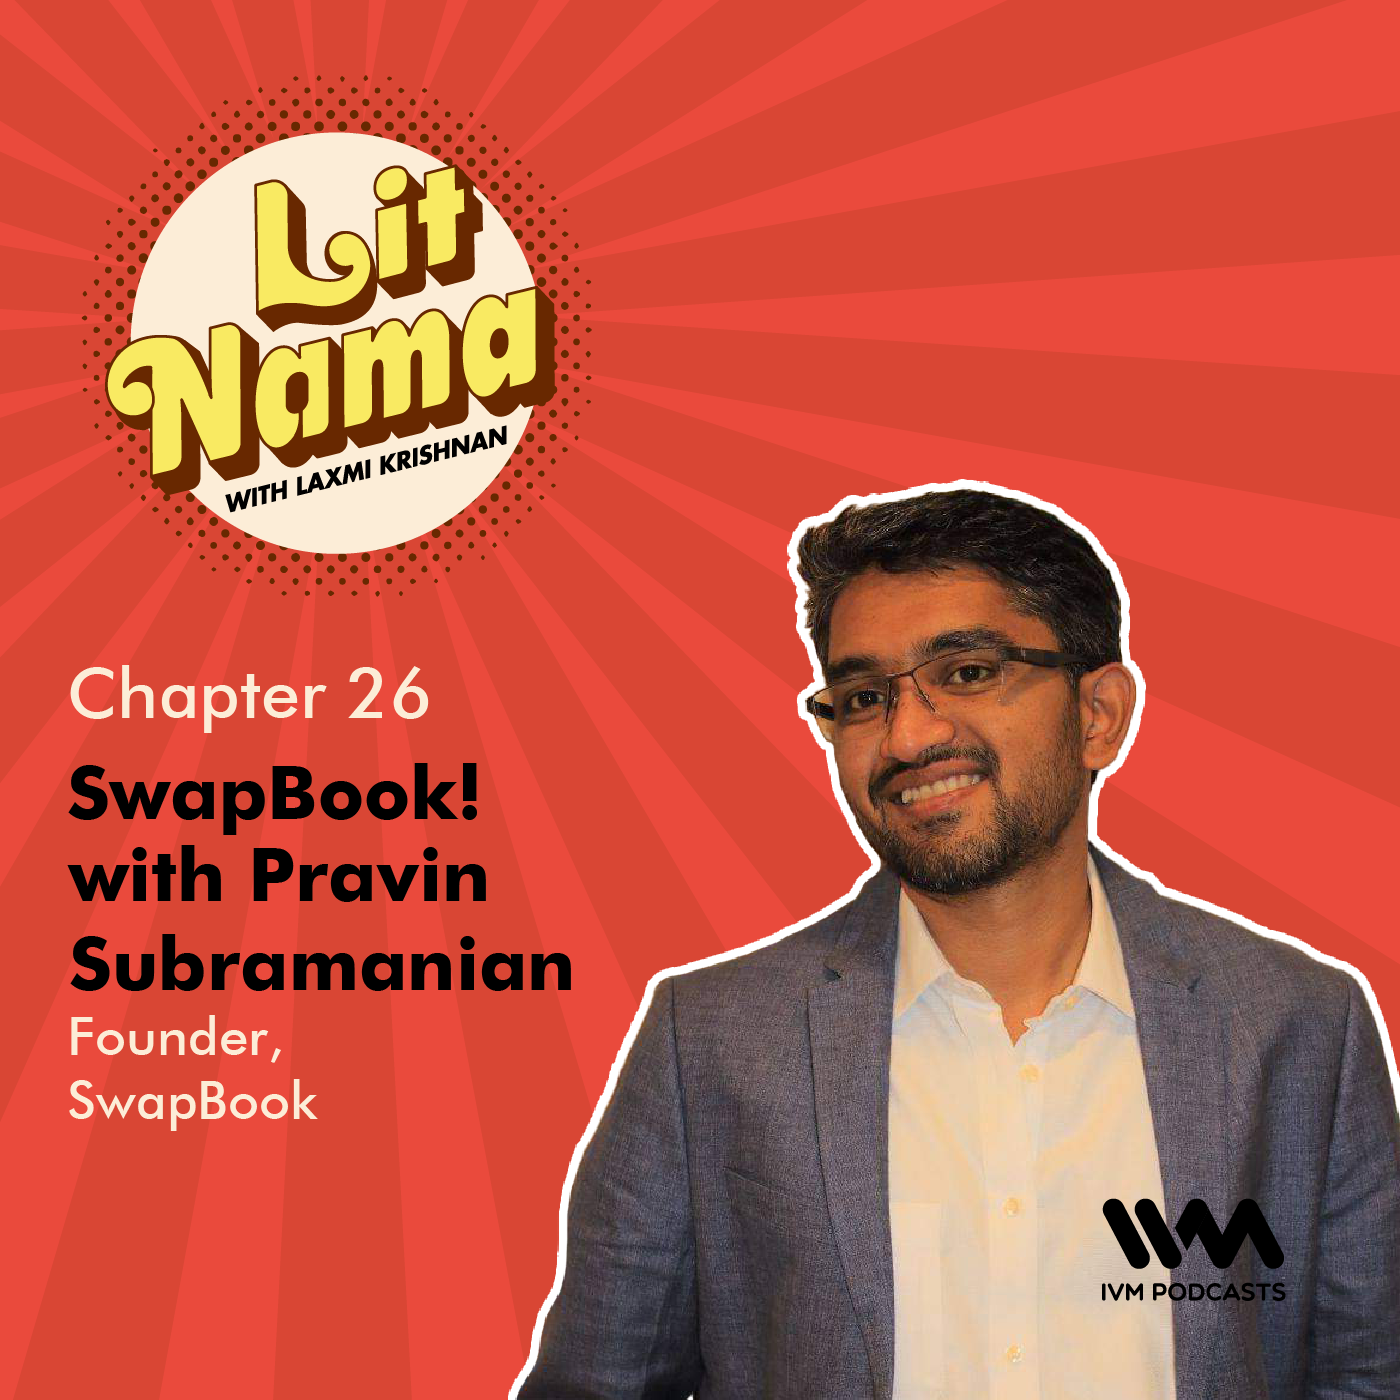 Chapter. 26: SwapBook! with Pravin Subramanian